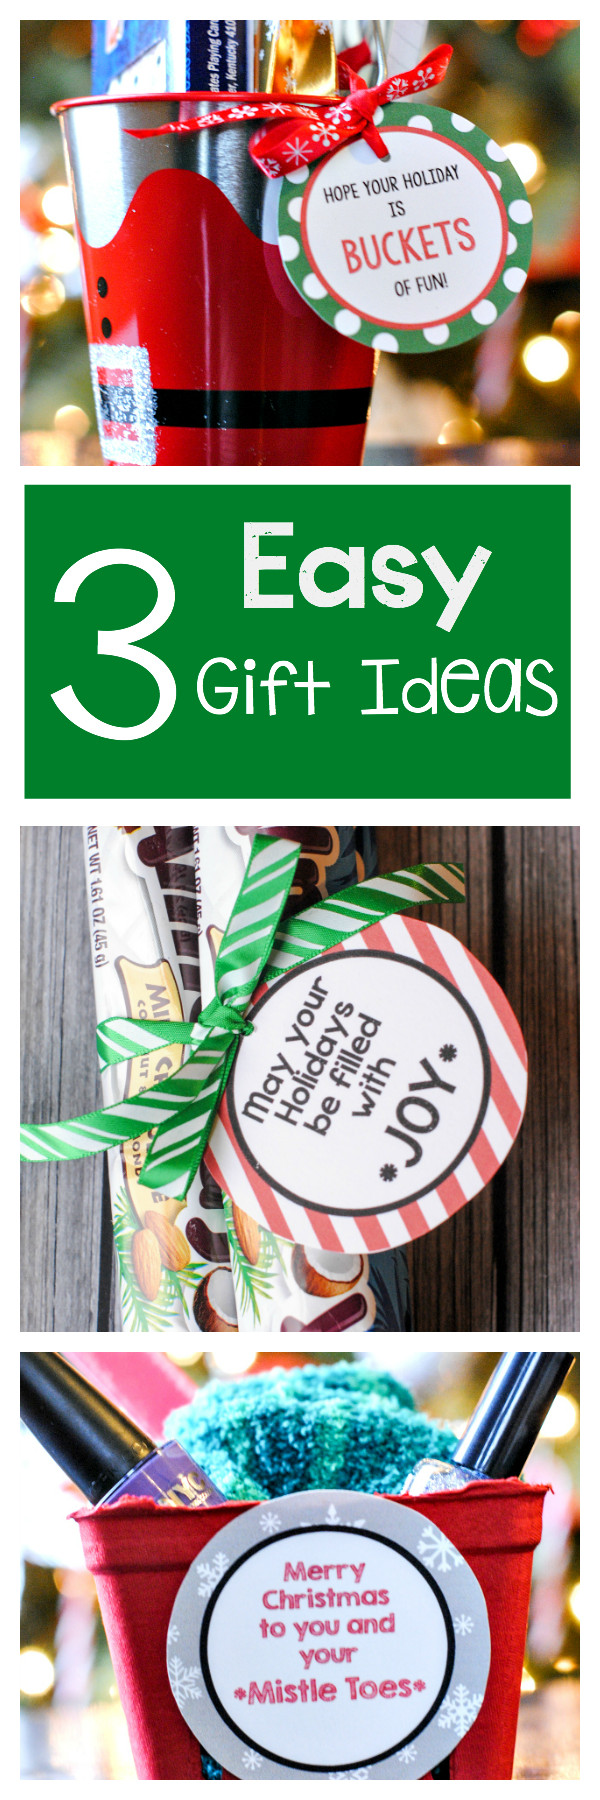 Easy Holiday Gift Ideas
 3 Easy Gifts Ideas for Friends Crazy Little Projects